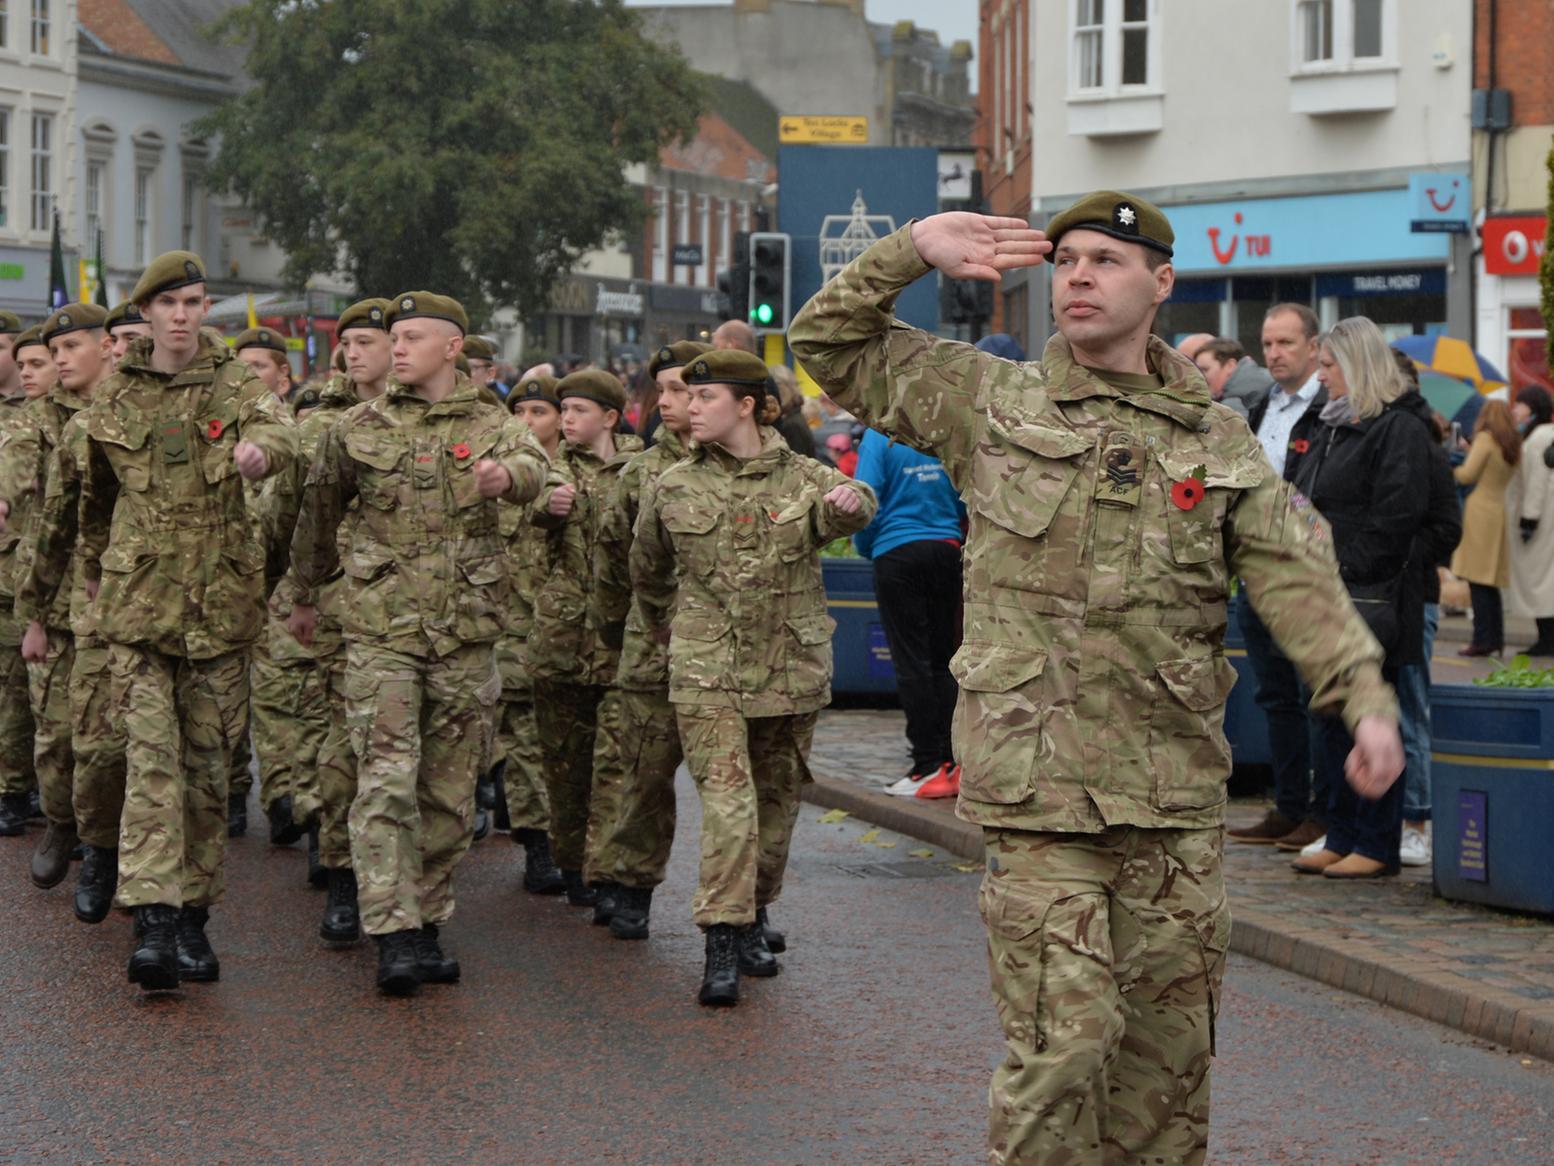 The remembrance parade makes its way to the Square.